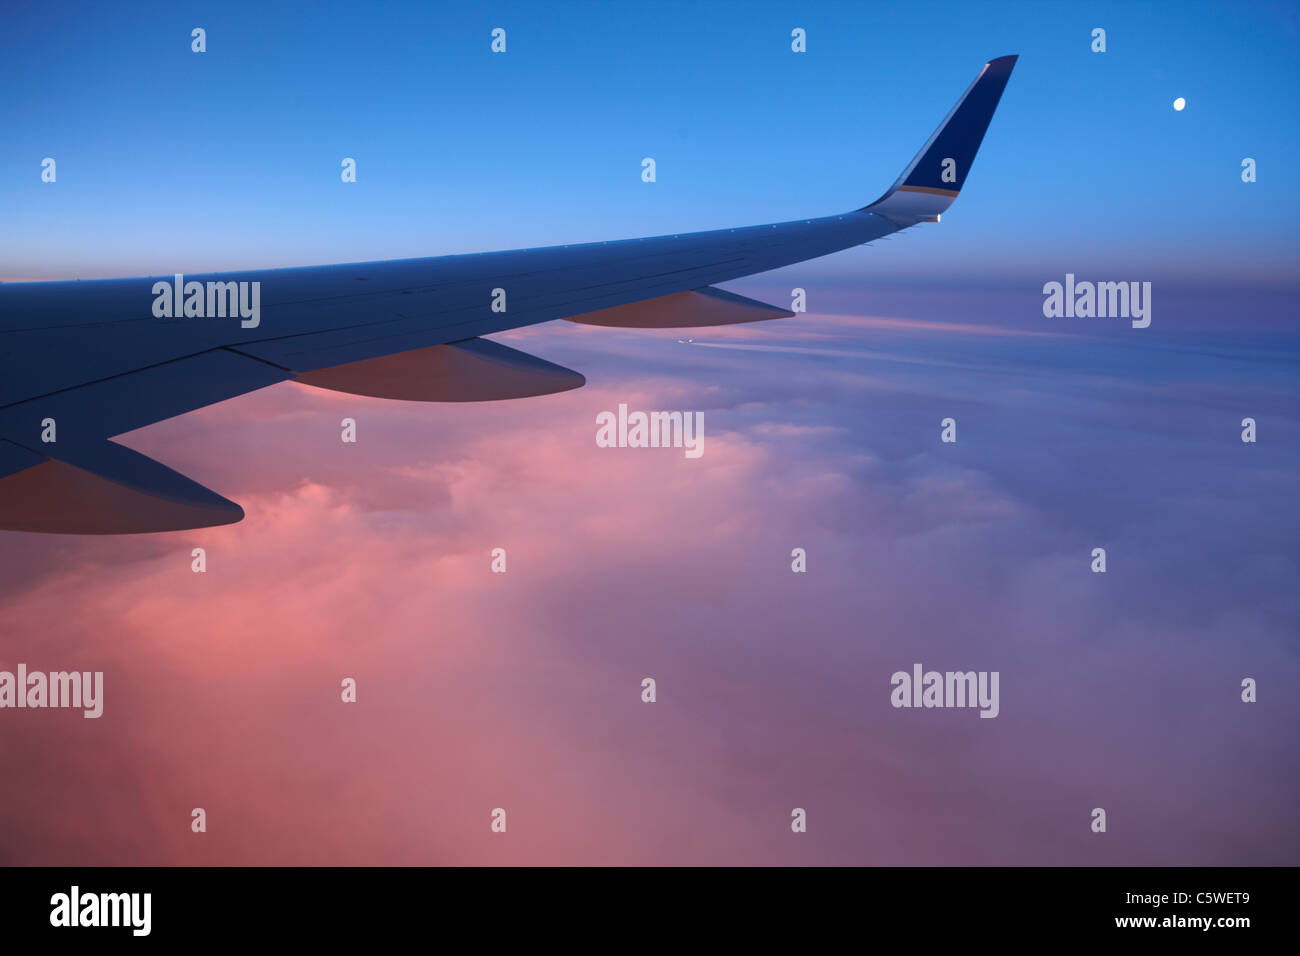 Air plane wing, close-up Stock Photo